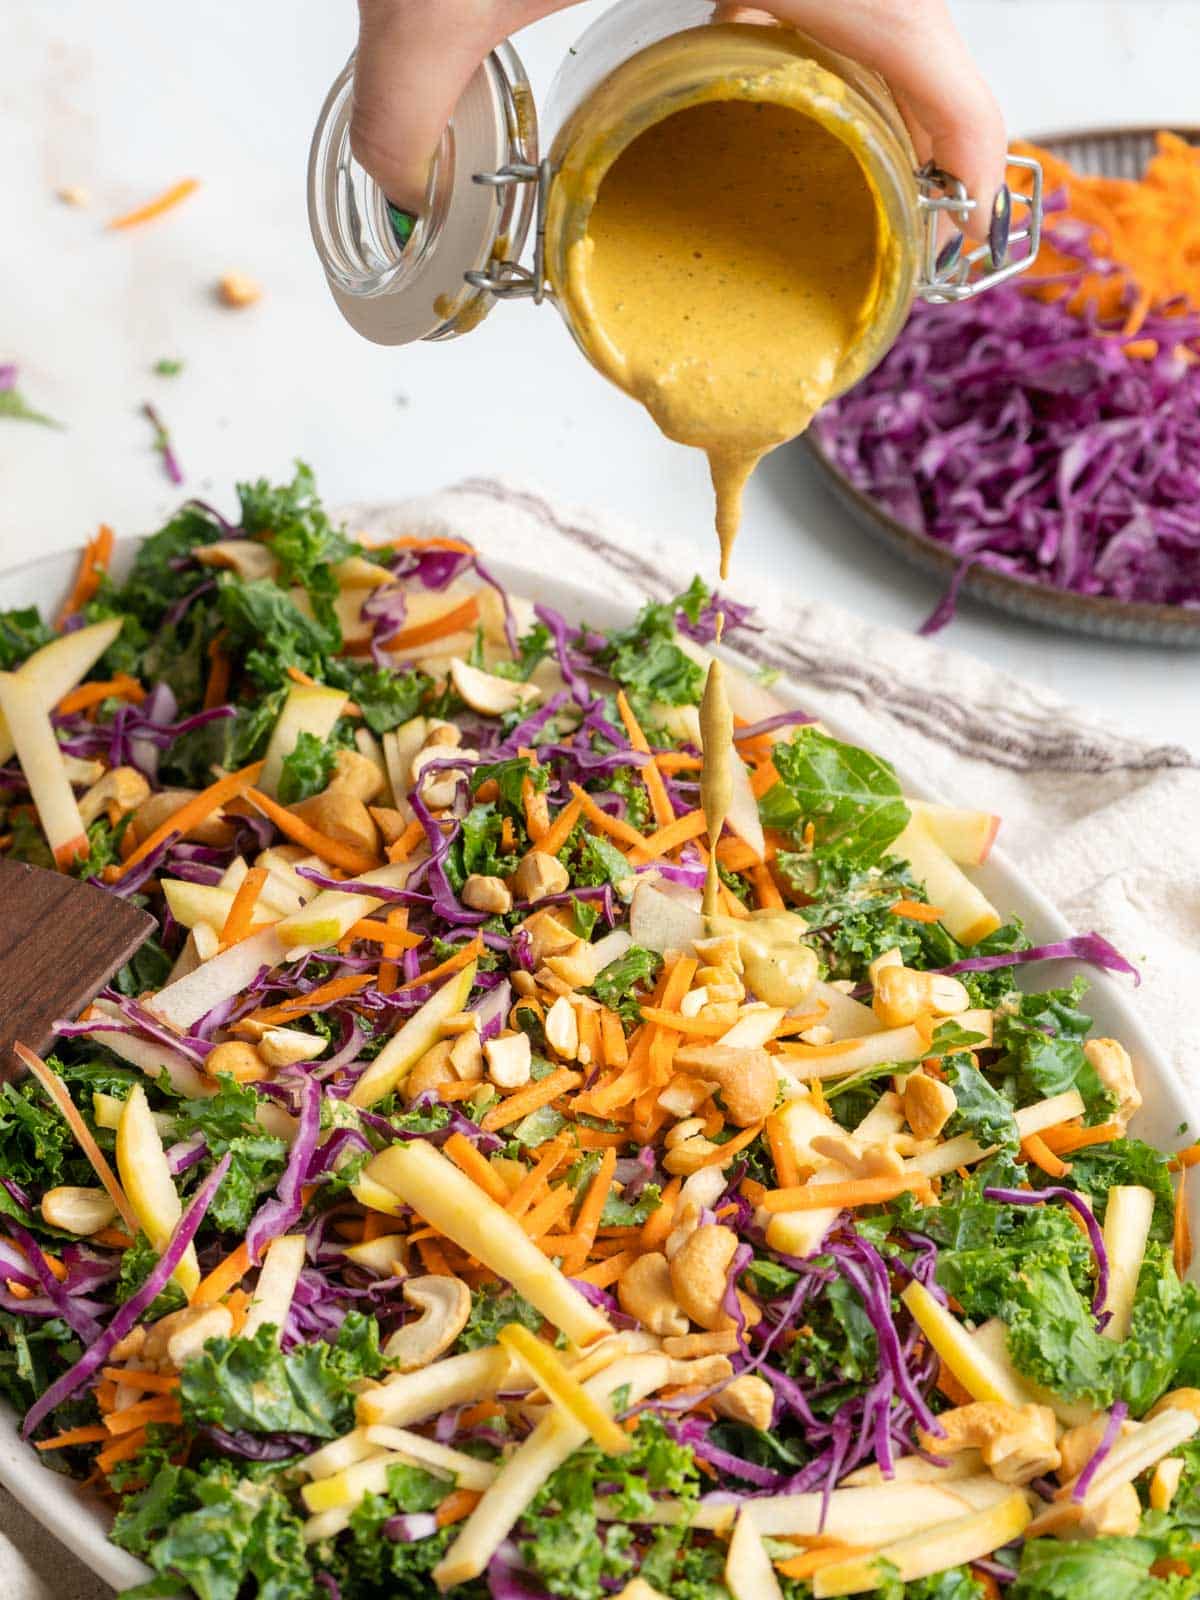 Pouring dressing on a kale slaw.